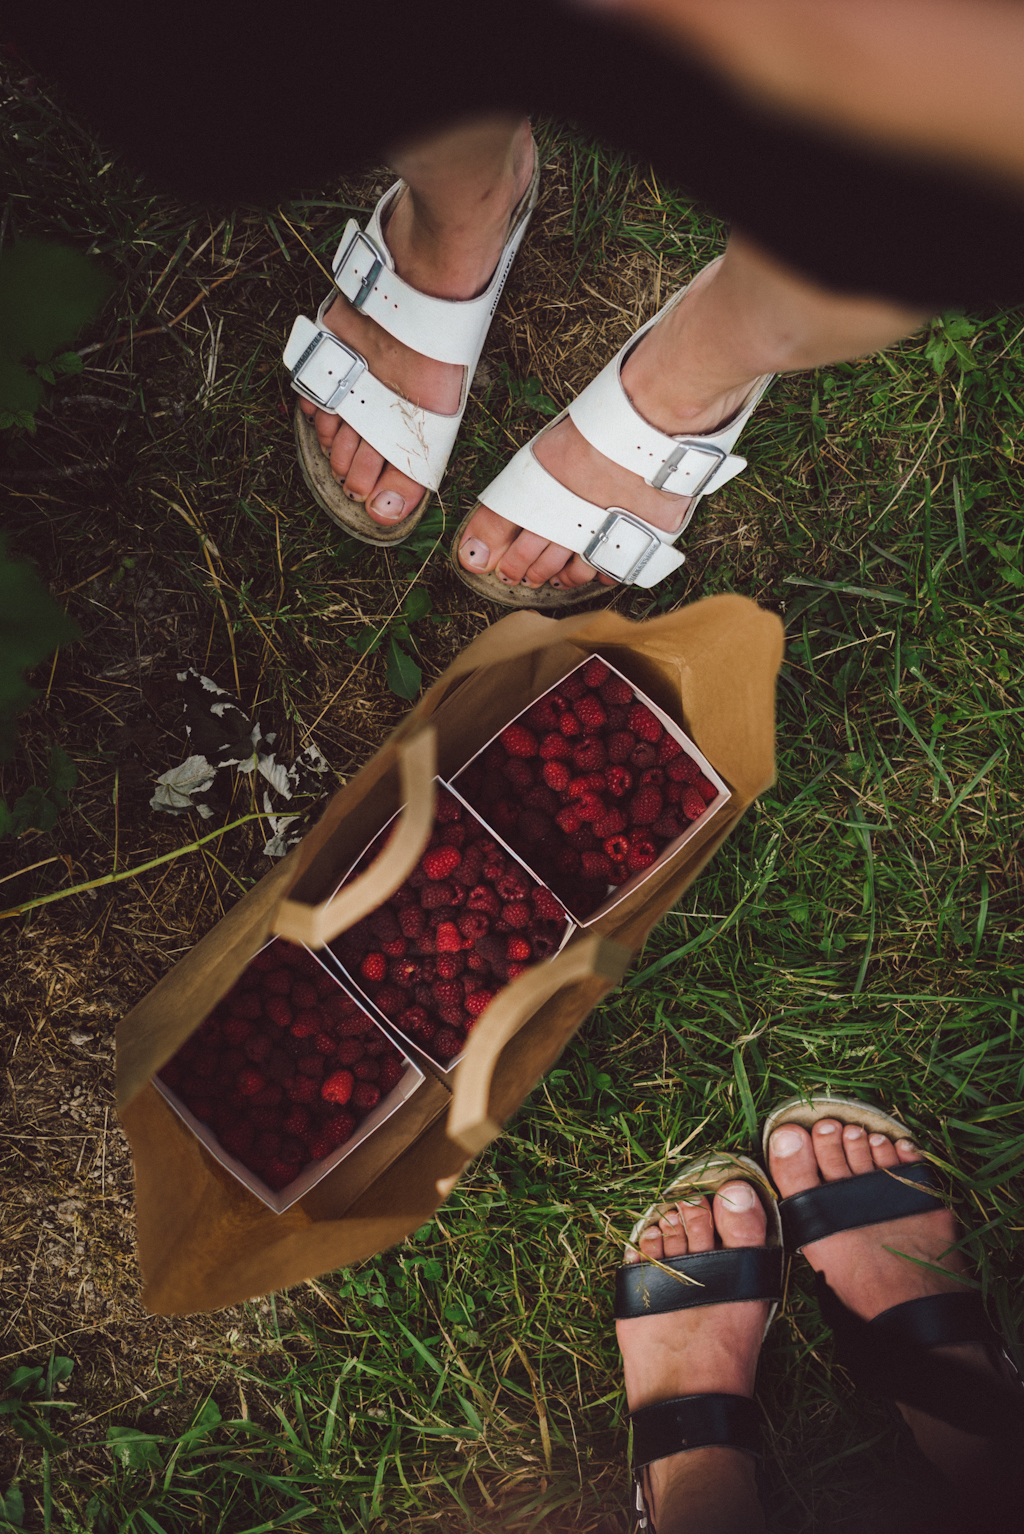 Raspberry picking by Babes in Boyland